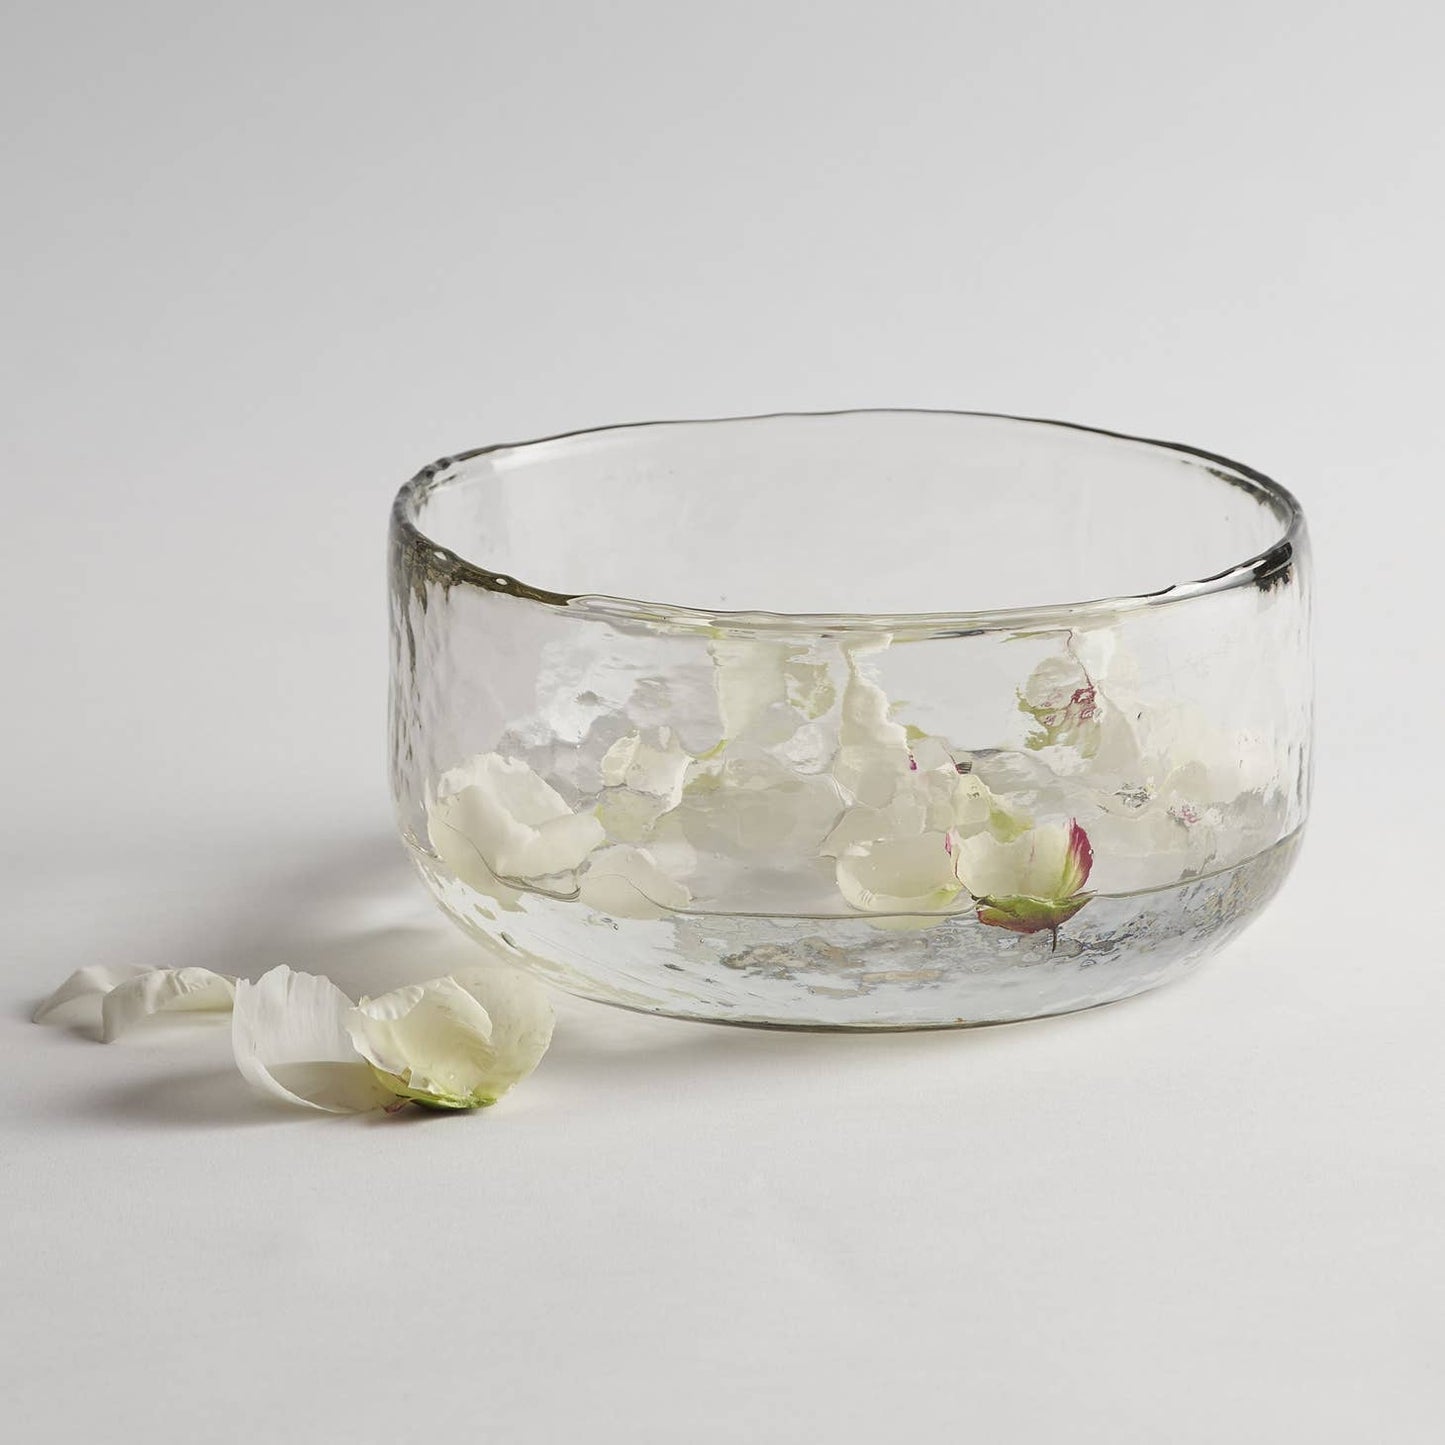 Made of thick, clear glass, this textured bowl looks lovely whether it contains fruit, salad, floating blossoms, a colorful side dish, or nothing at all. With so many possible uses, this one won't stay in the cupboard for long. Ethically made in India.